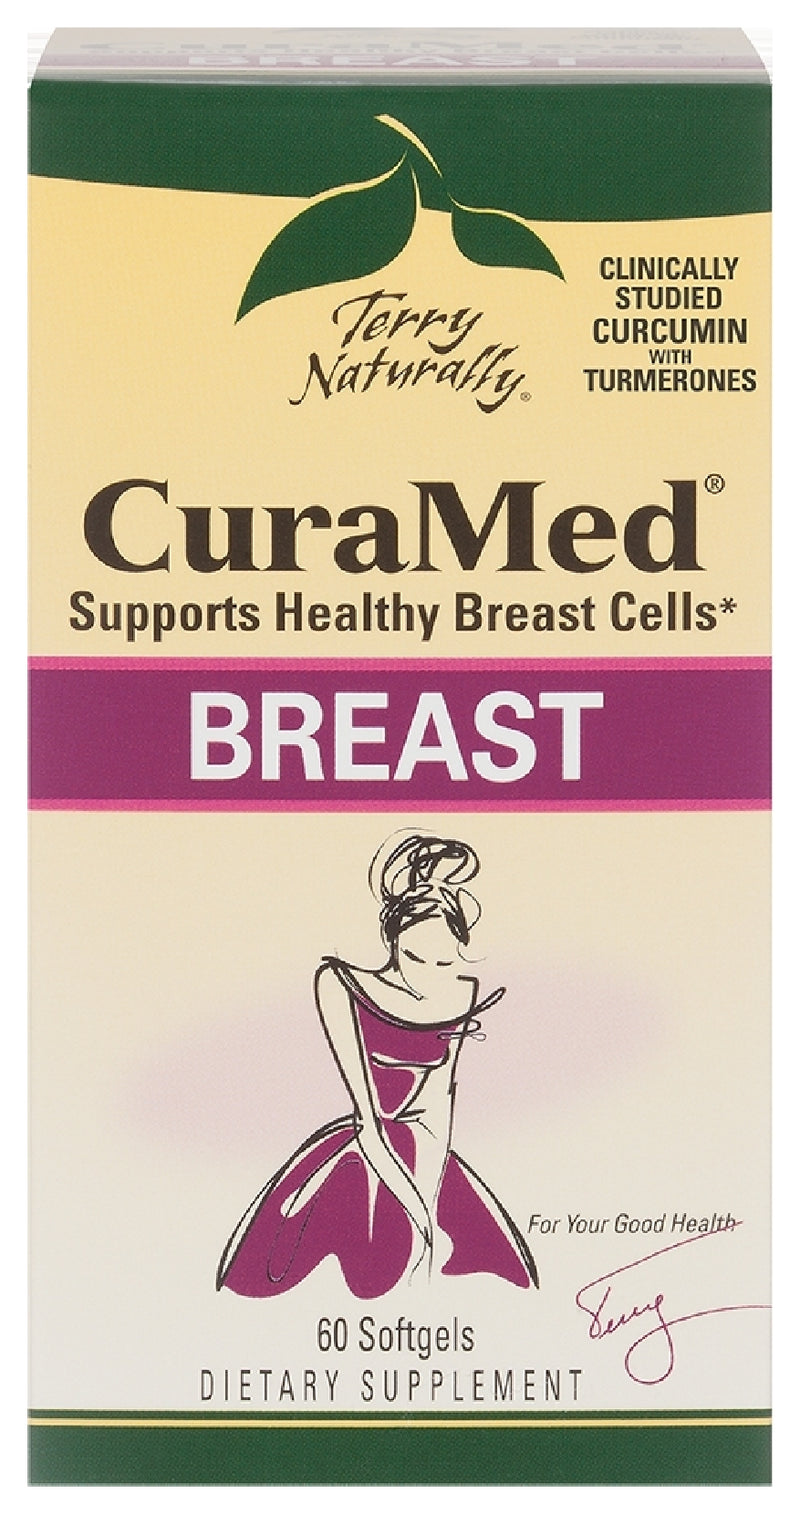 Terry Naturally CuraMed Breast 60 Softgels